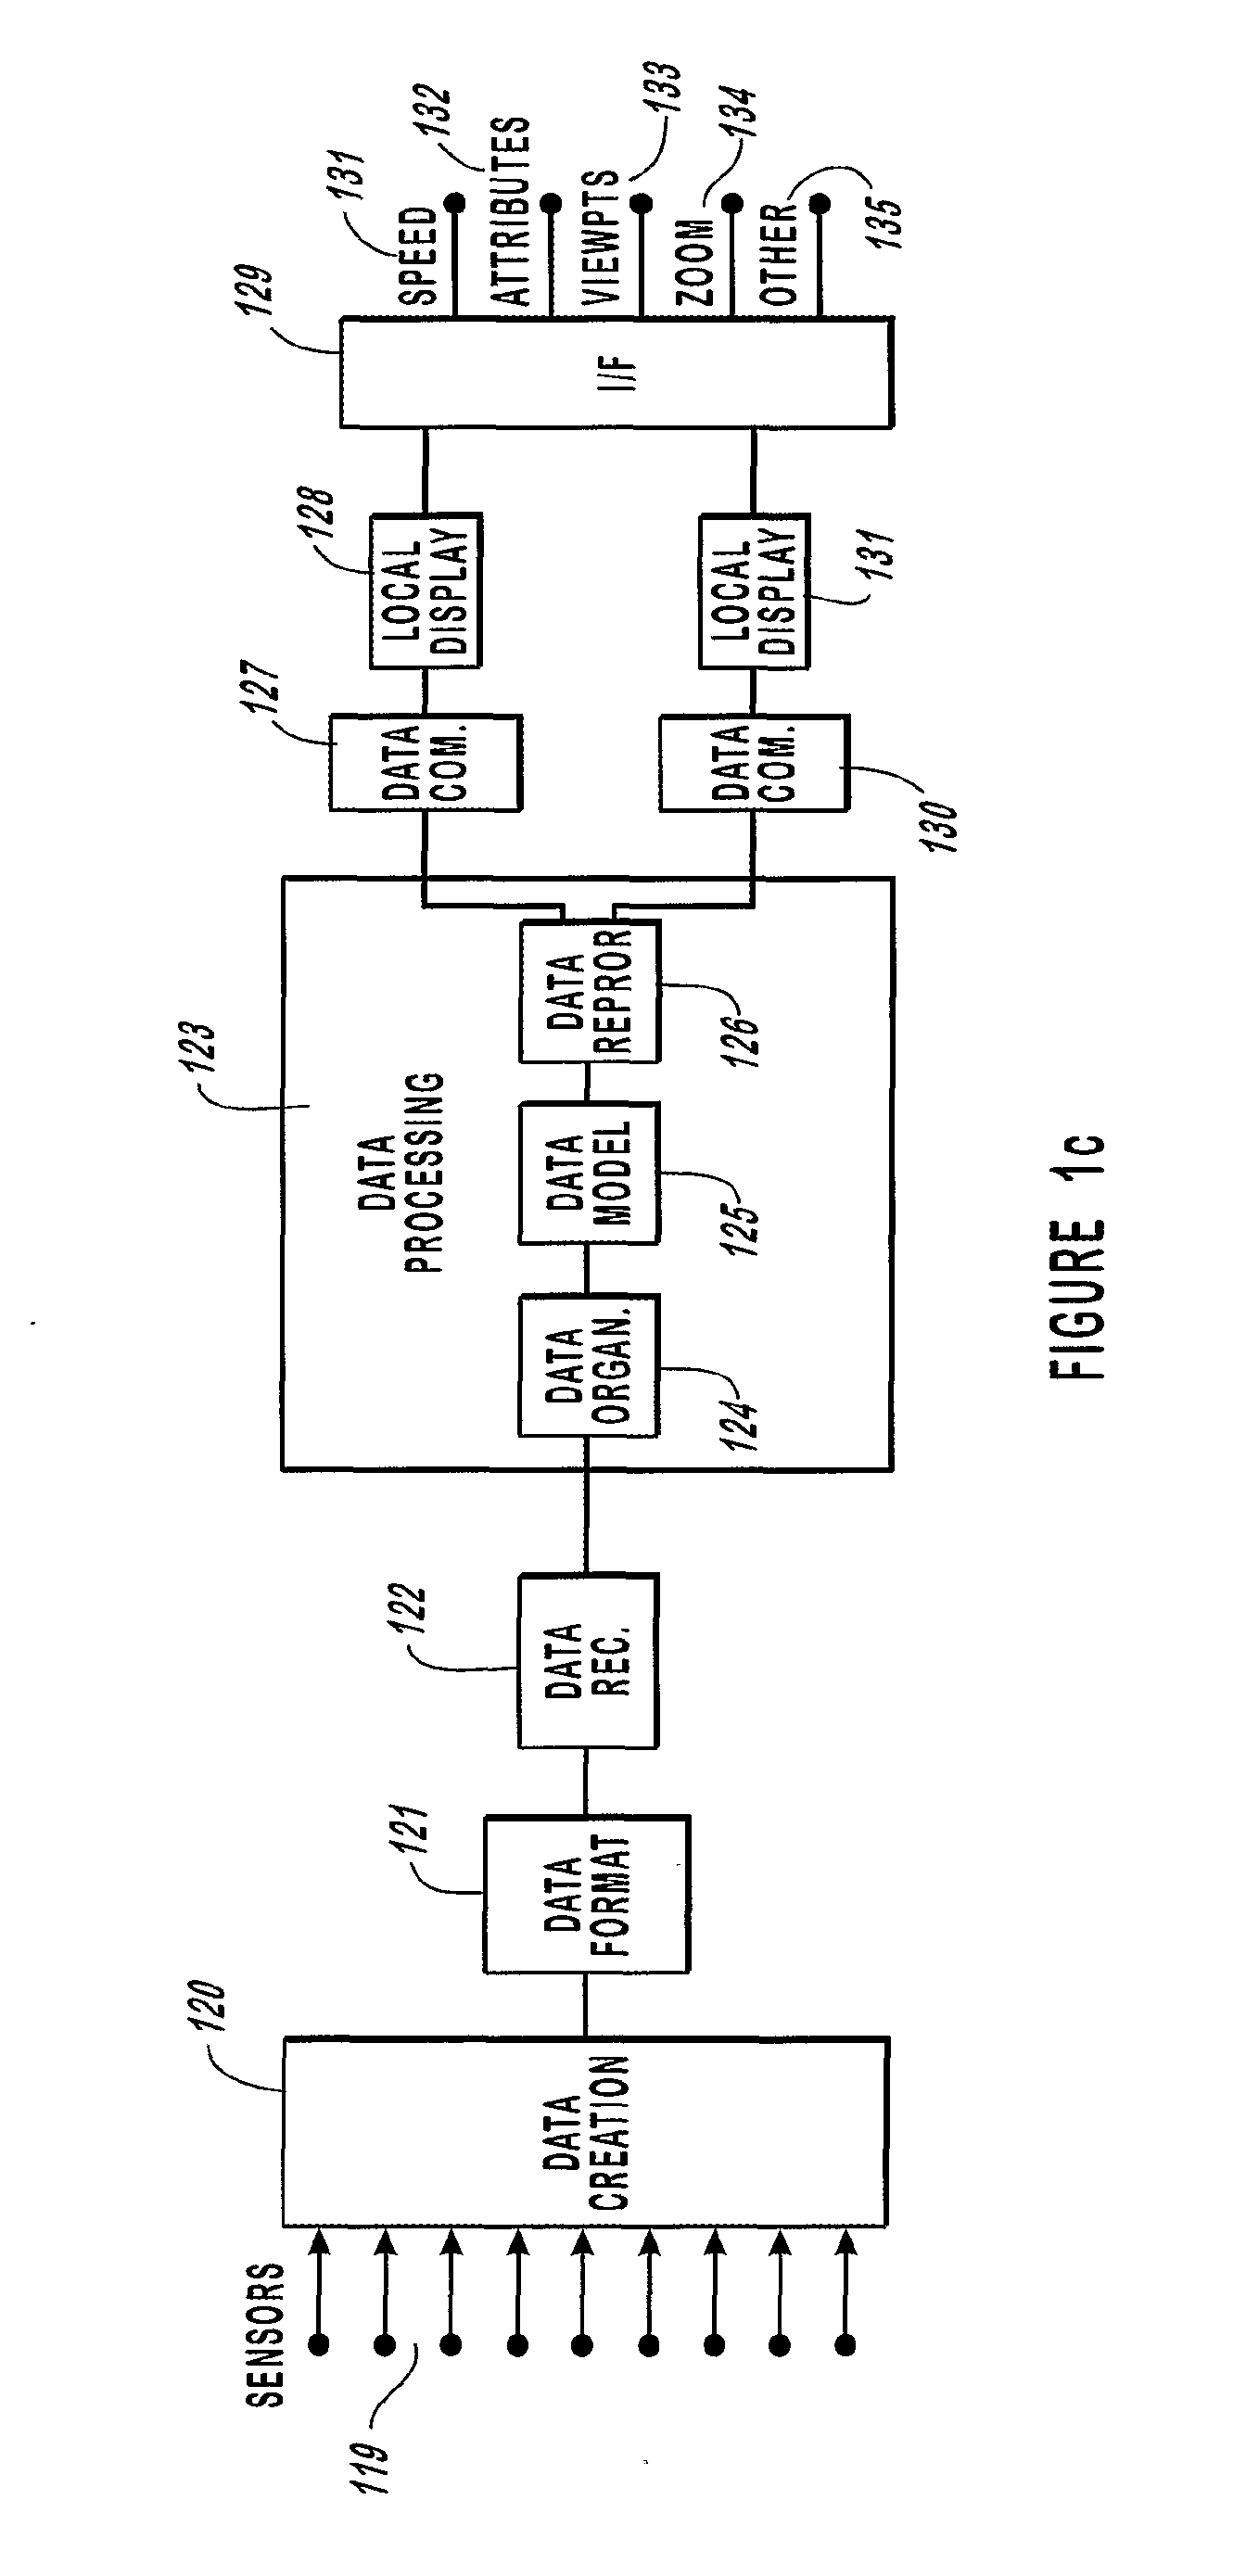 Method and apparatus for monitoring anesthesia drug dosages, concentrations, and effects using n-dimensional representations of critical functions